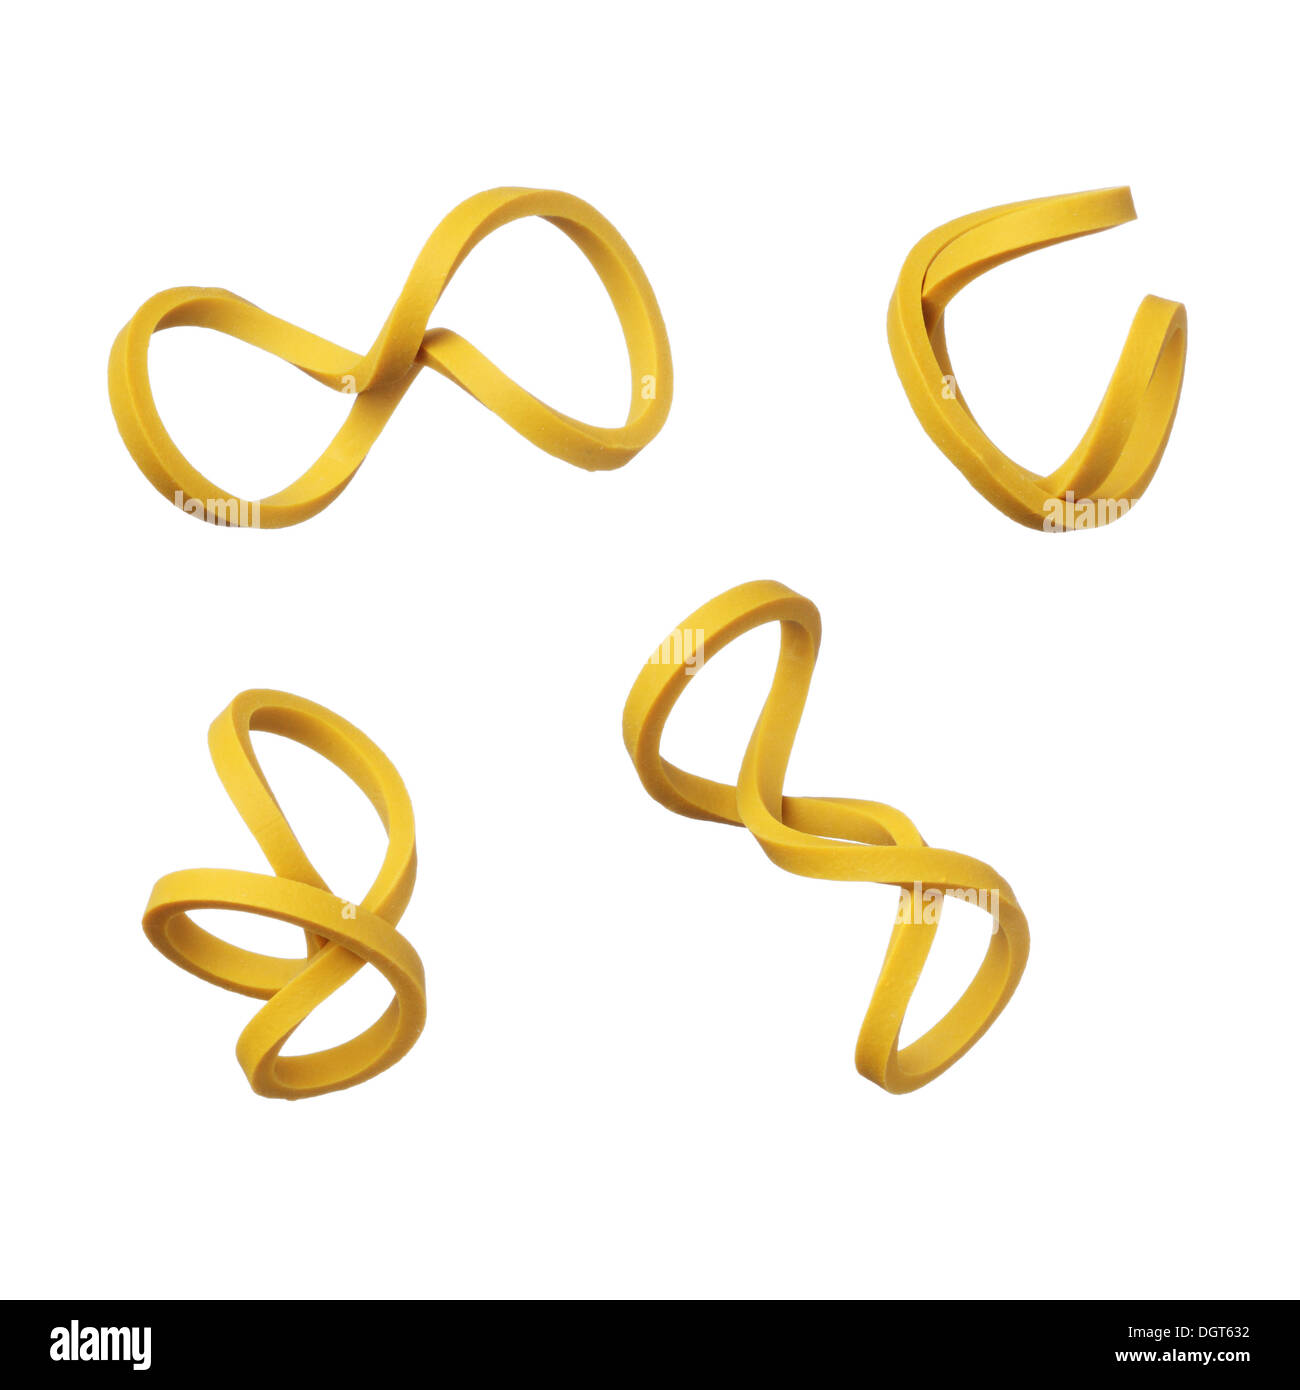 Twisted yellow elastic rubber bands isolated on white background Stock Photo